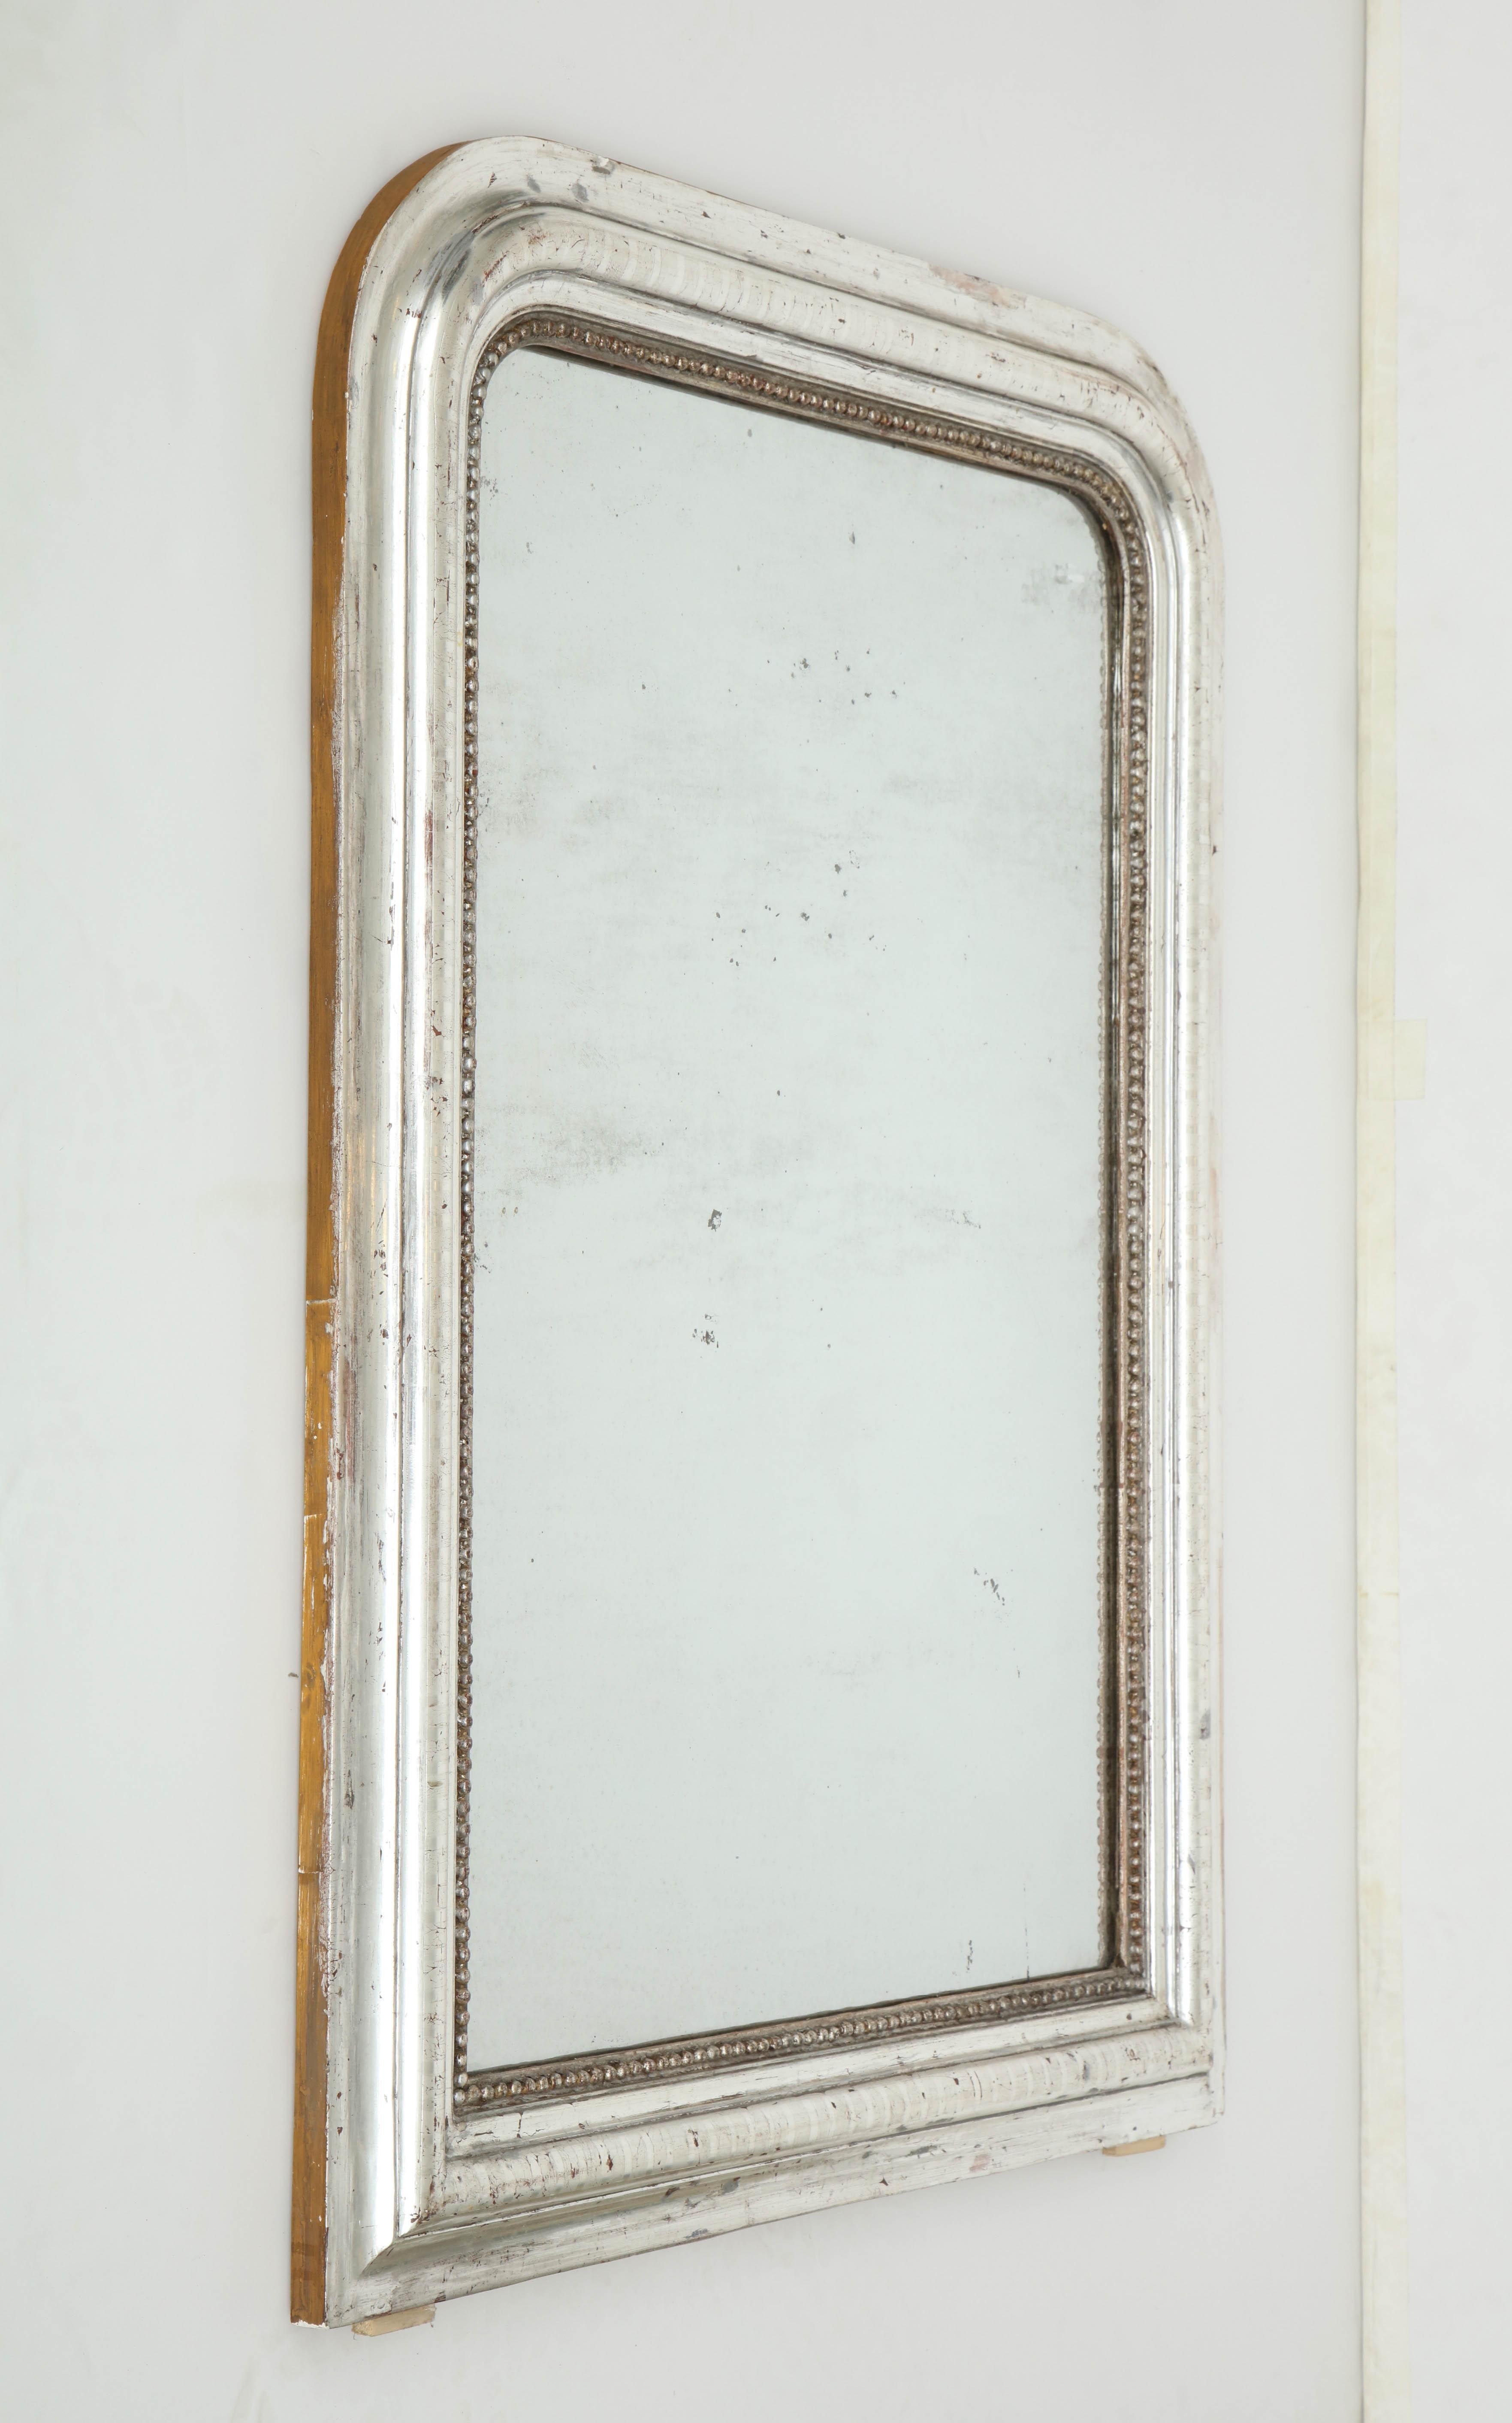 We love the simple form of this Louis-Philippe mirror. Rectangular, with rounded top corners, the mirror is silver leafed and features a subtle geometric design on the frame.